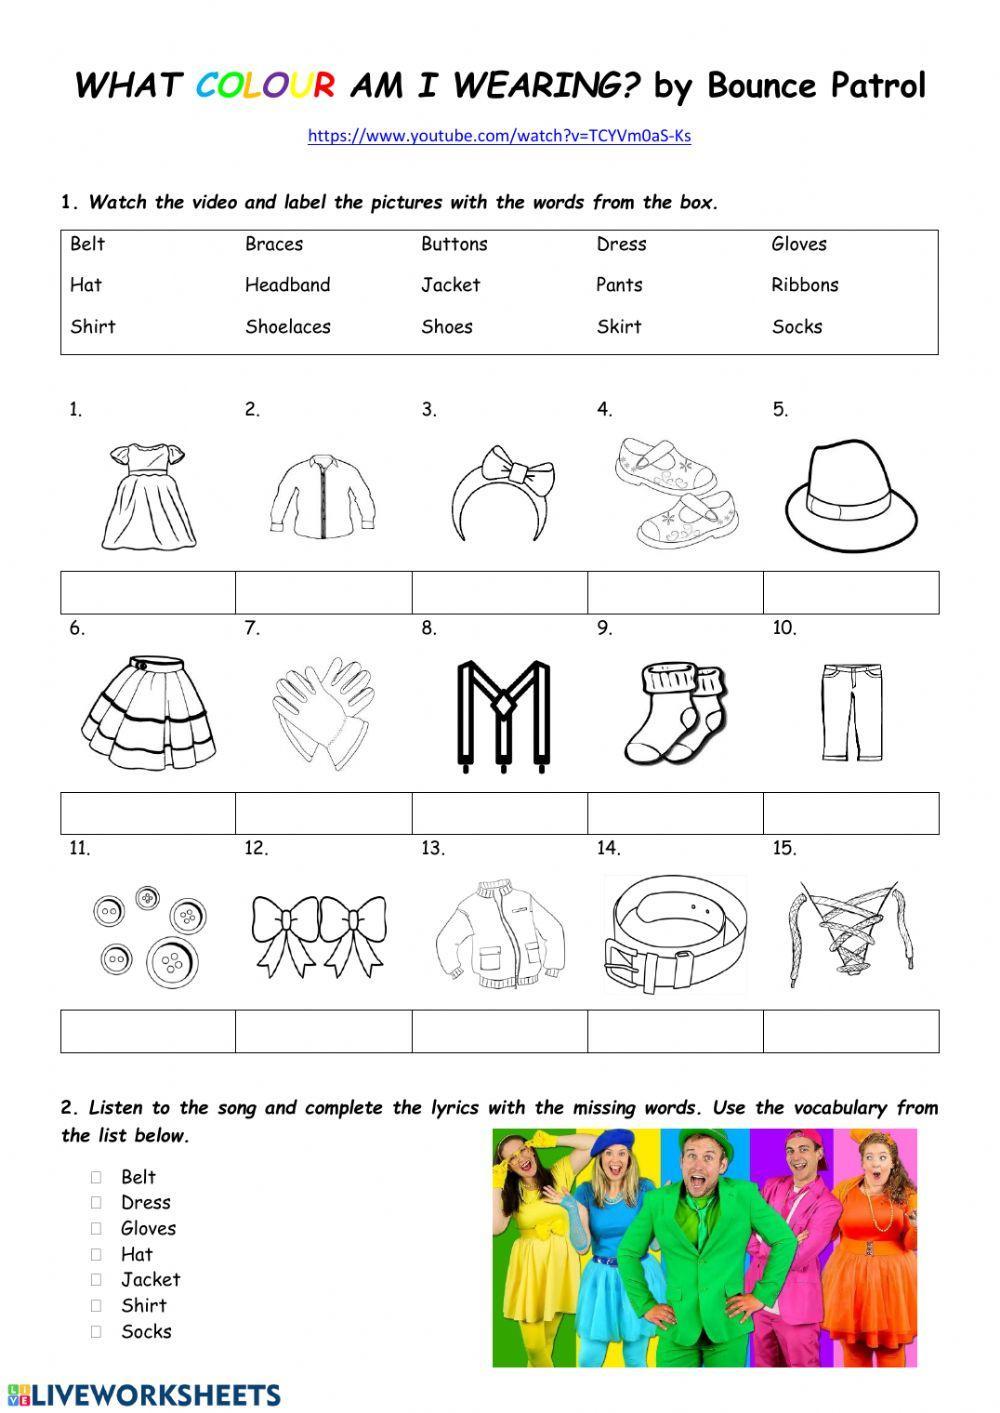 What colour am I wearing?-Bounce Patrol song worksheet | Live Worksheets